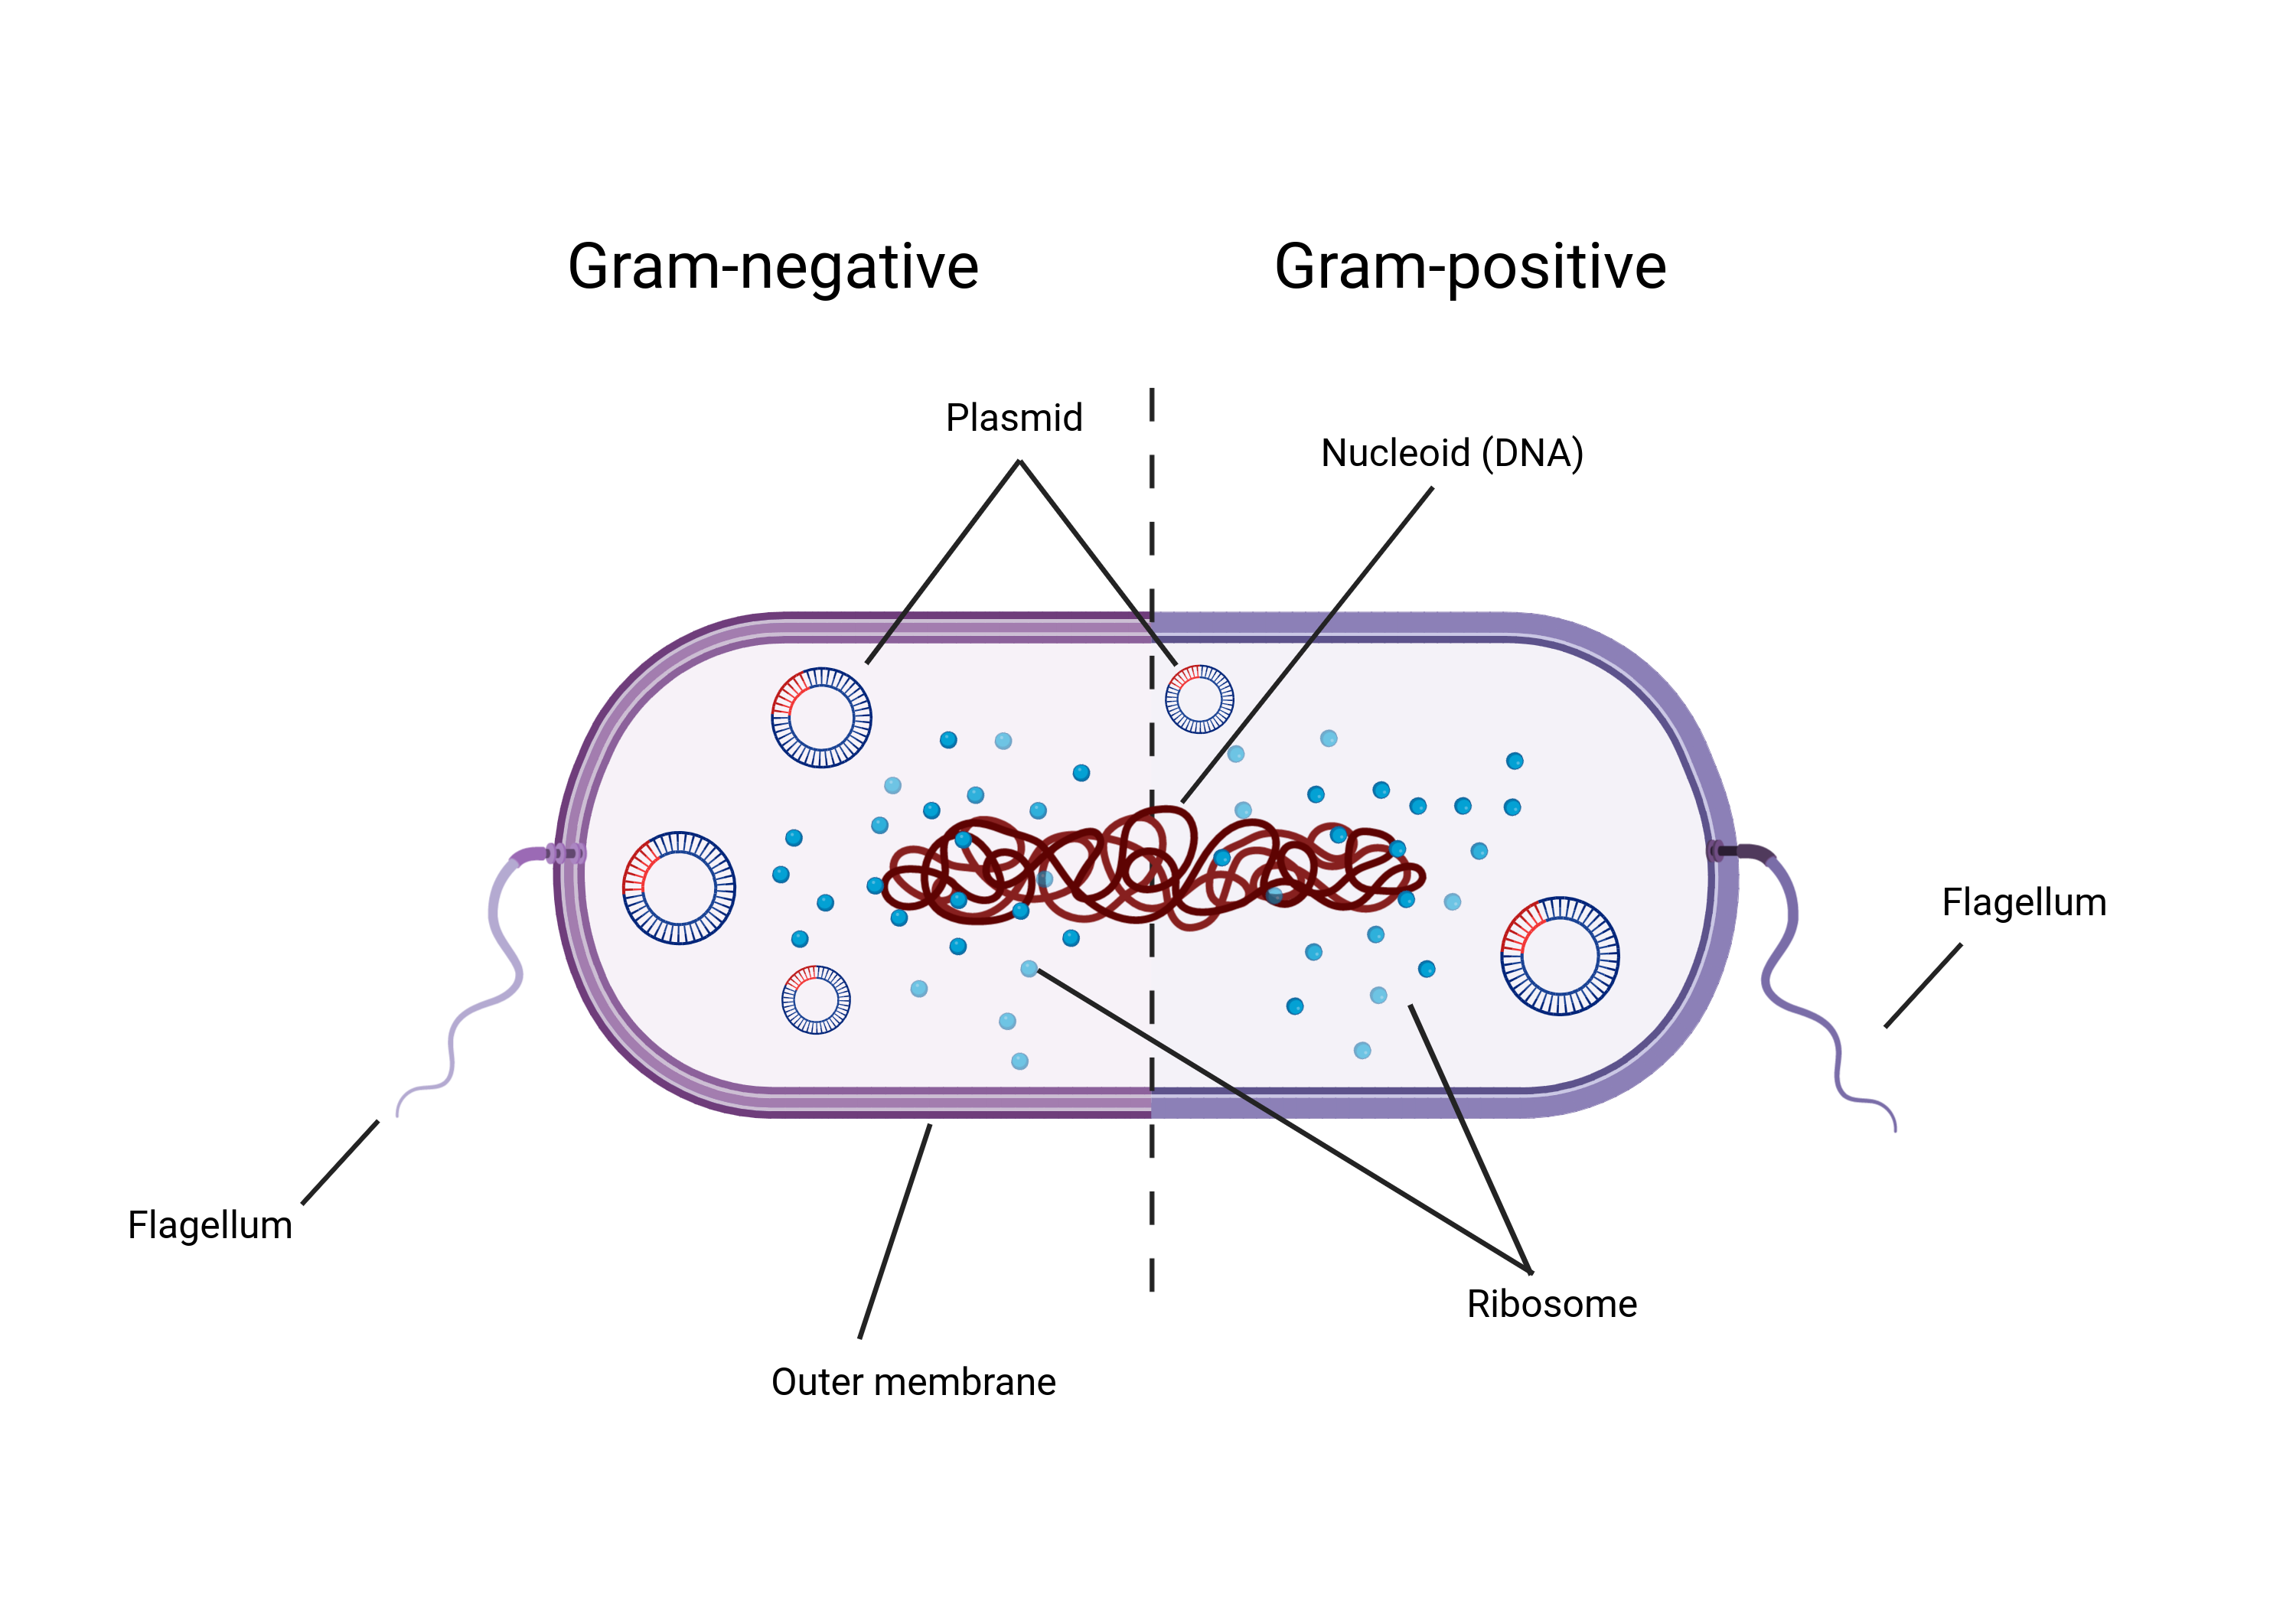 Figure depicting the general structure of a bacterial cell. The bacterial cell is split in half with common features of gram-negative bacteria on the left side and common features of gram-positive bacteria on the right side. Common features of both, for example the nucleoid, ribosomes, flagellum, span both sides of the bacterial cell.